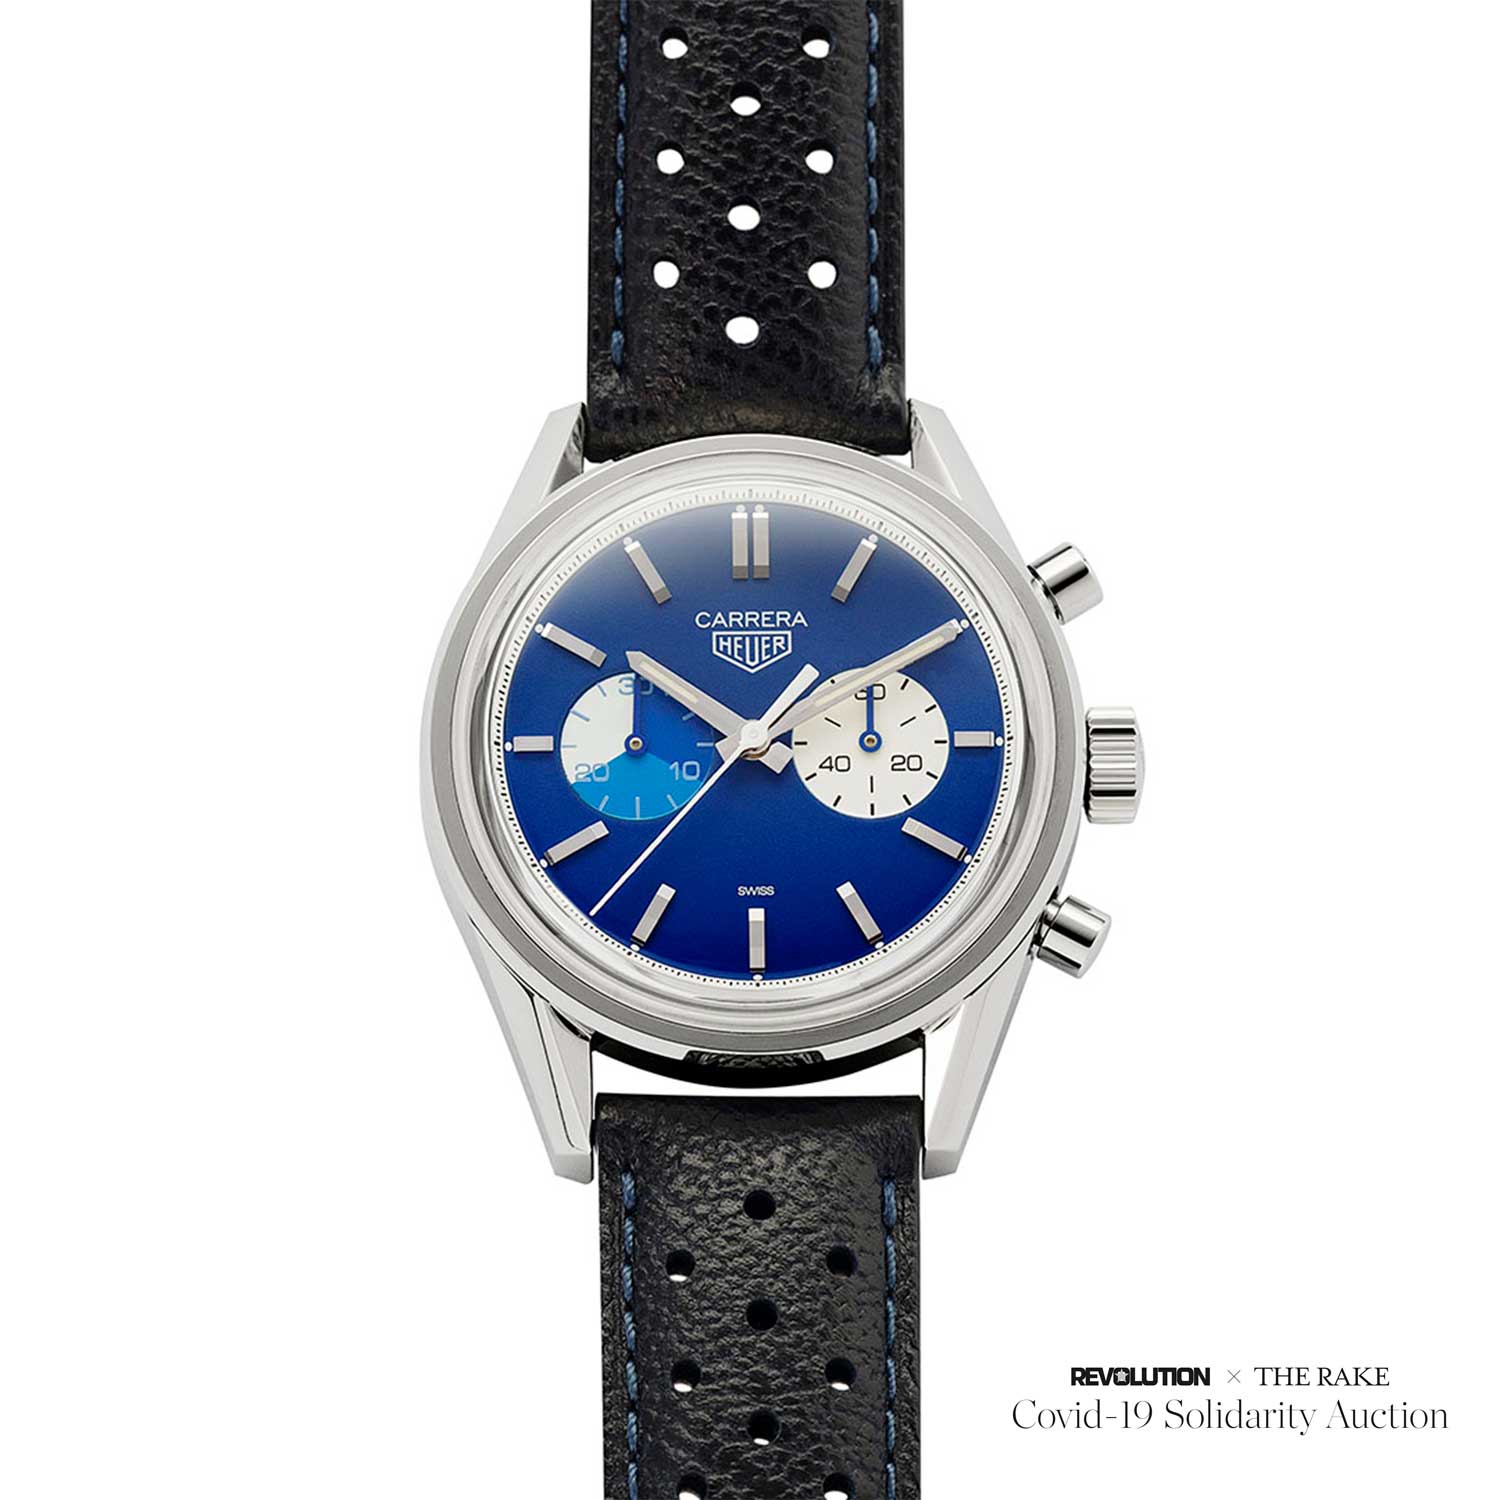 Prototype of the Carrera Chronograph “Blue Dreamer” for Revolution x The Rake Covid-19 Solidarity Auction